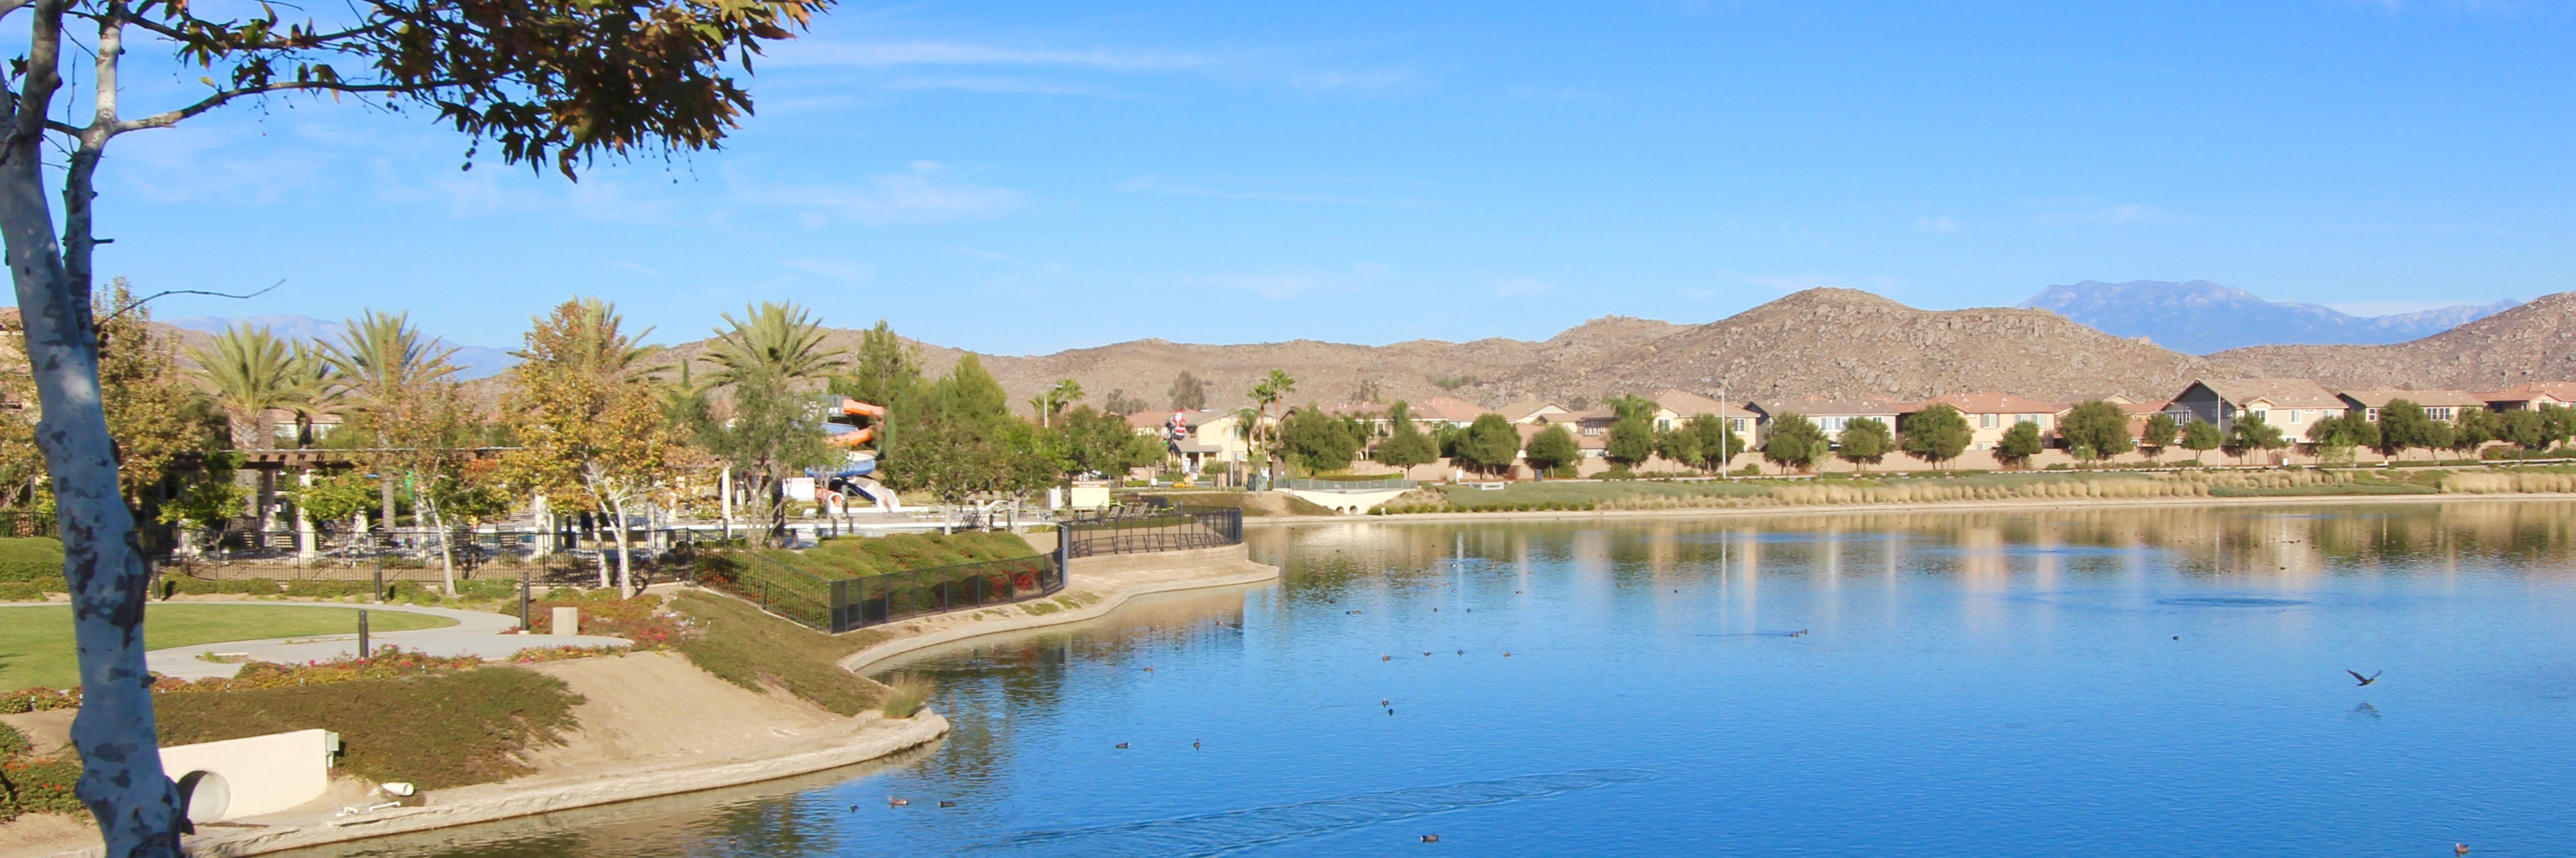 The Lakes in Menifee offers an amazing lake and mountain view